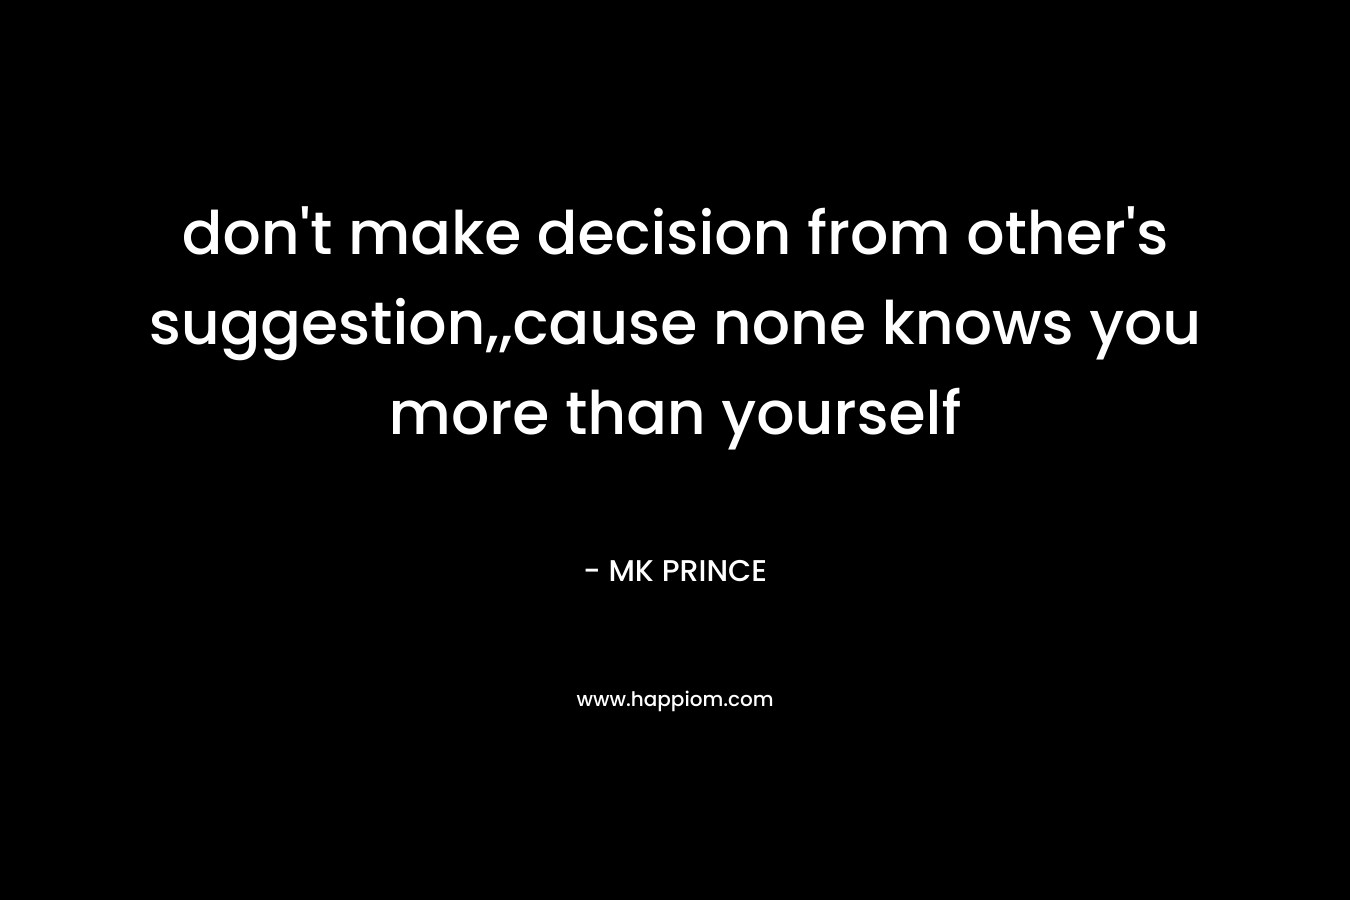 don't make decision from other's suggestion,,cause none knows you more than yourself